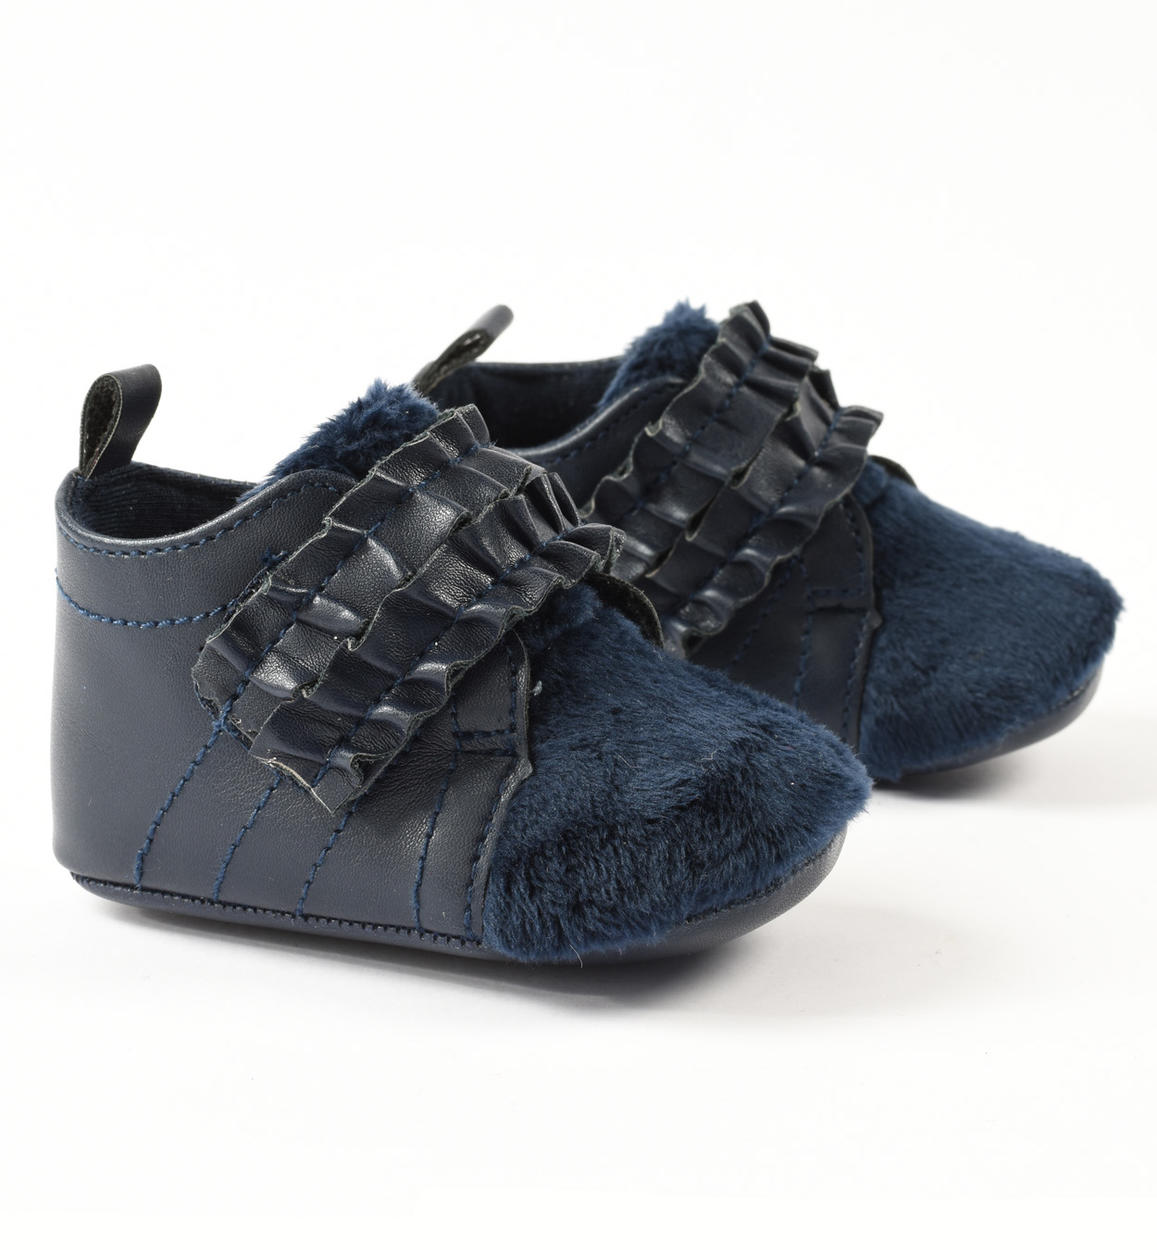 newborn leather shoes